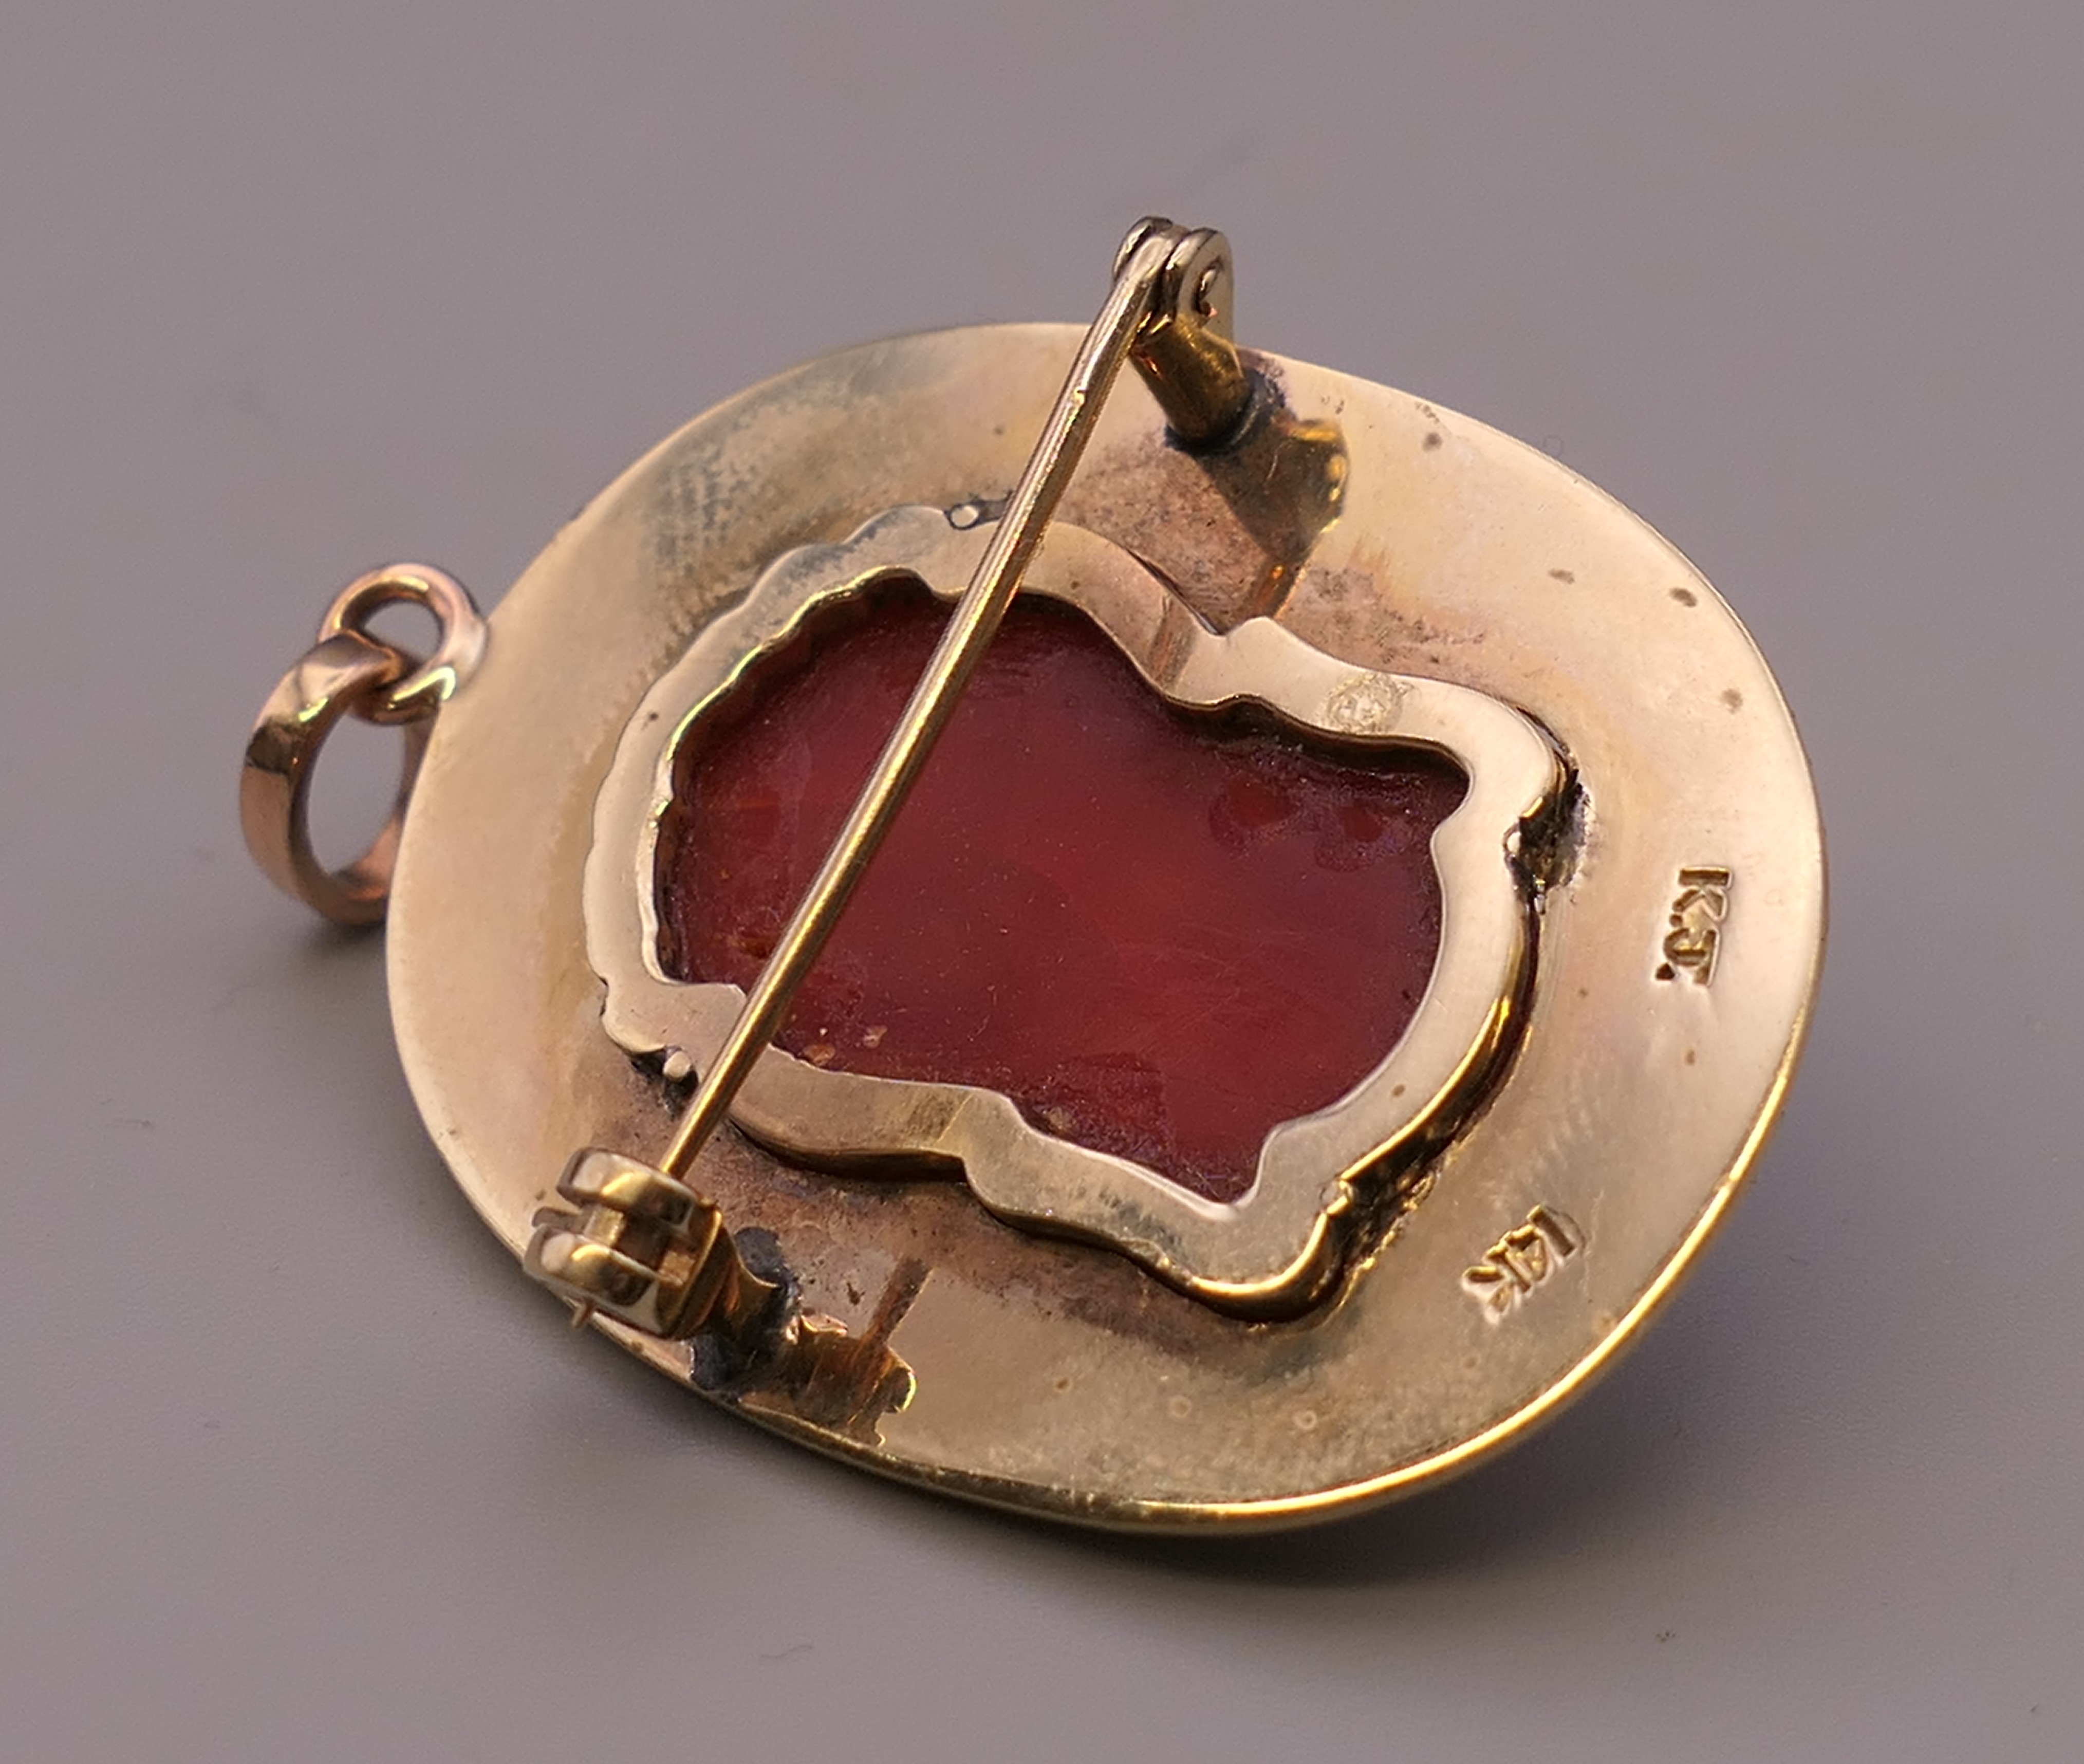 A 14 K gold and coral brooch/pendant. 4.5 cm high. 13 grammes total weight. - Image 4 of 4